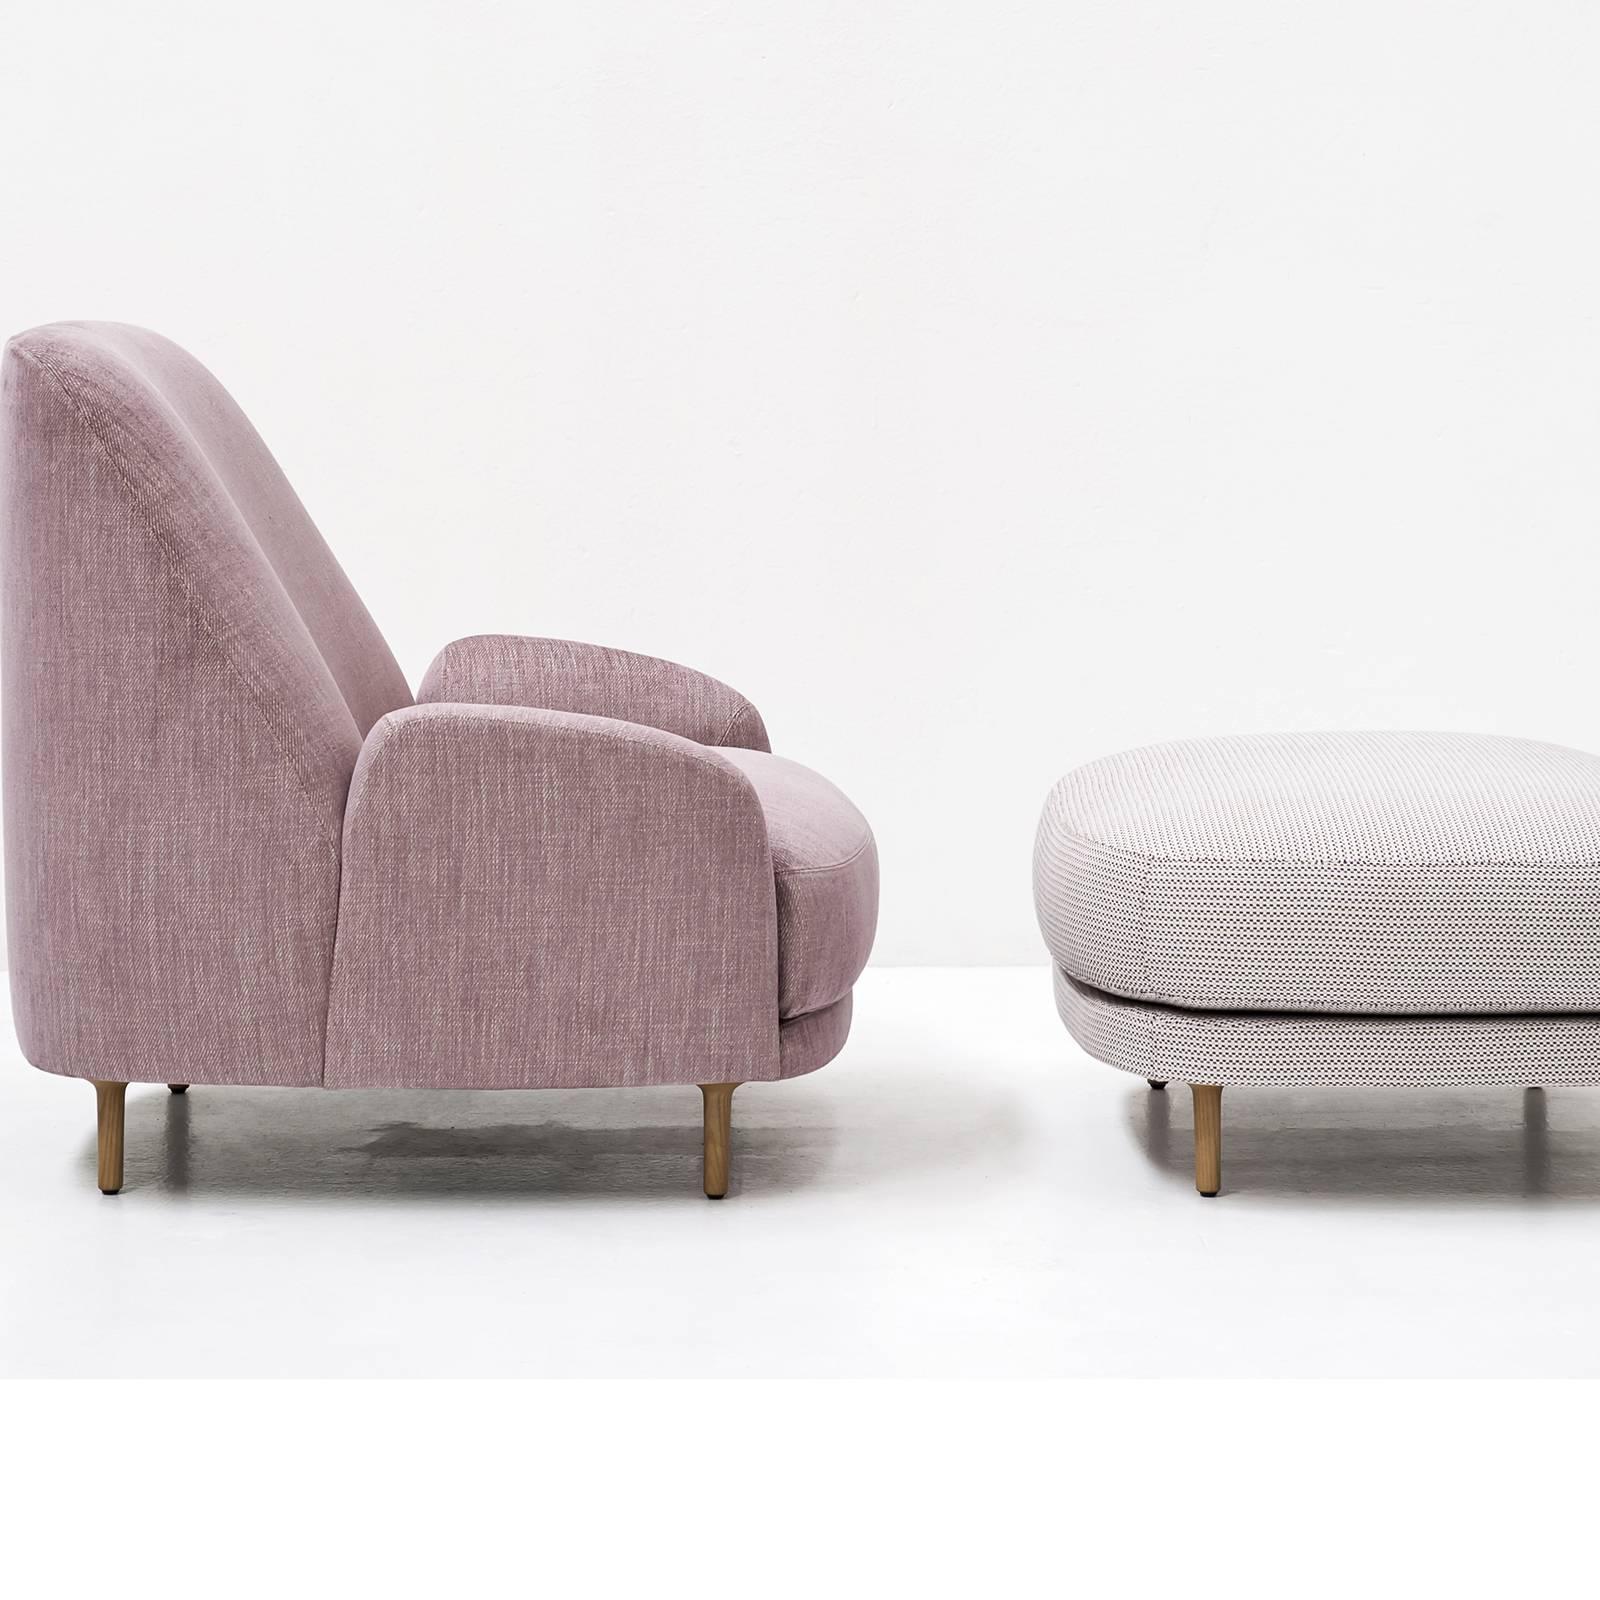 Striking a perfect balance between sophistication and comfort, this armchair is a superb piece of functional decor that will enliven a modern or Classic decor with elegance. Either alone or paired with the Santiago pink ottoman, this piece boasts